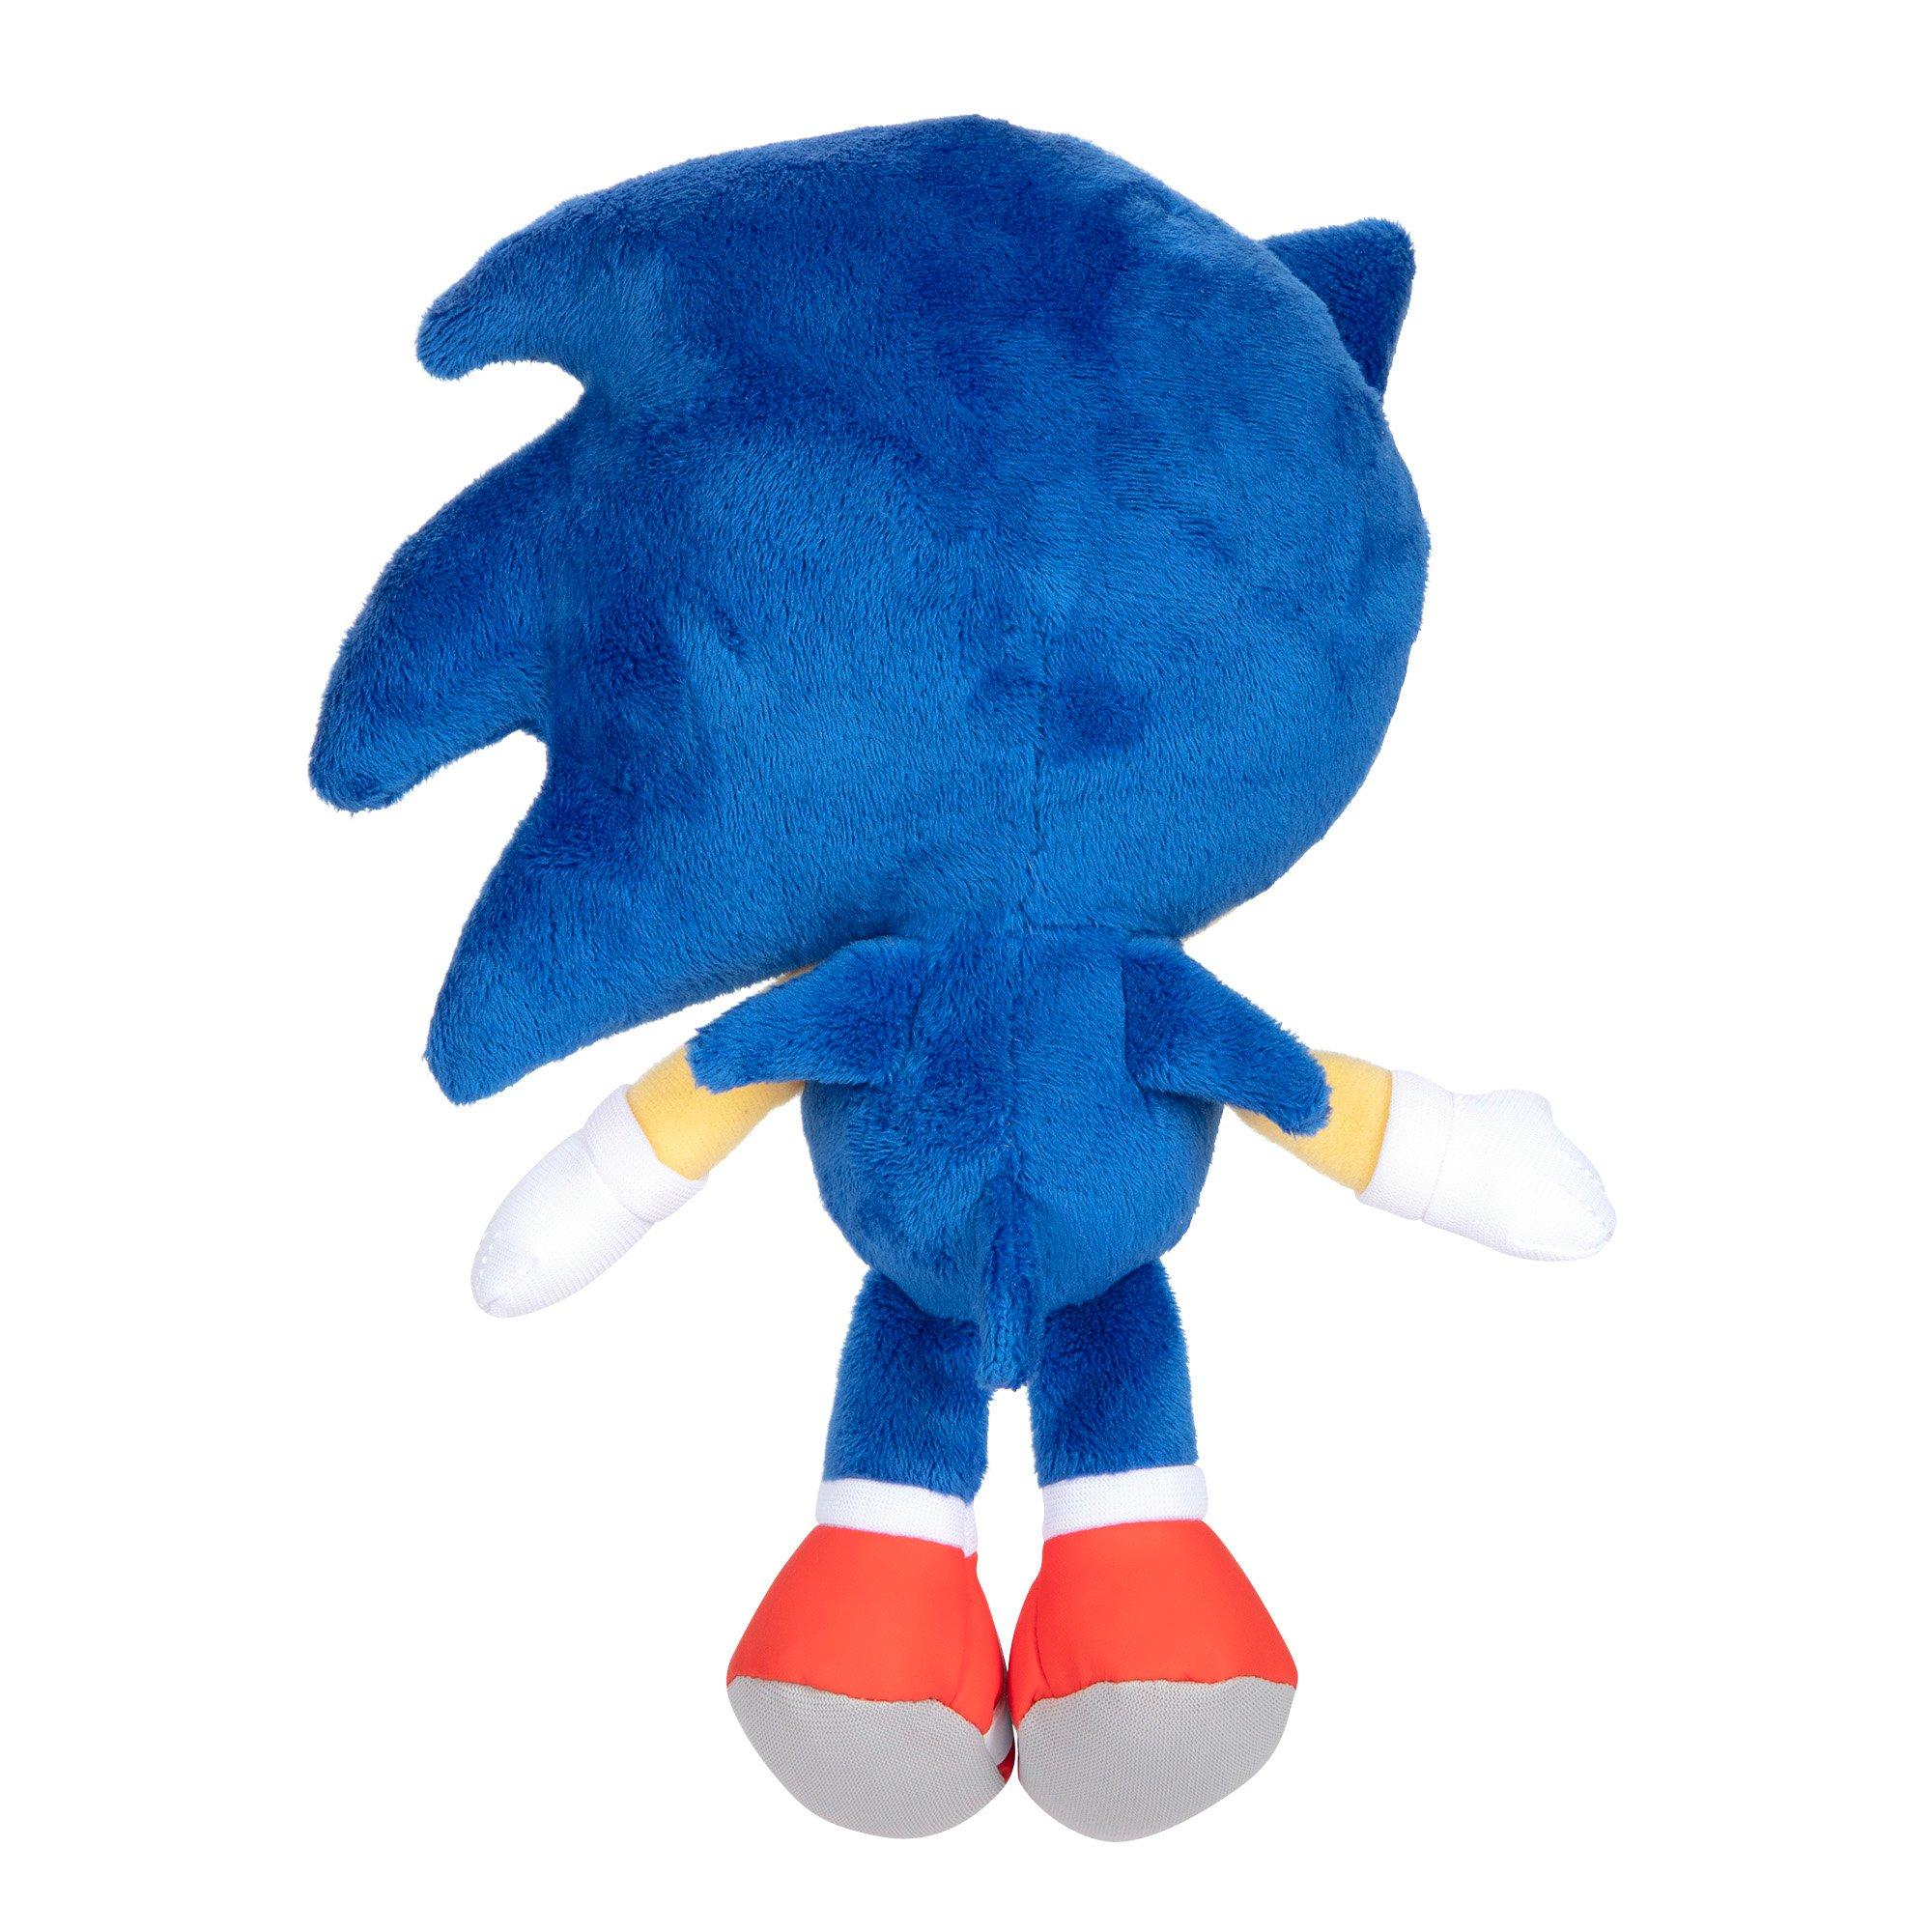 Sonic the Hedgehog 2 - 9 inch Sonic Plush inspired by the Sonic 2